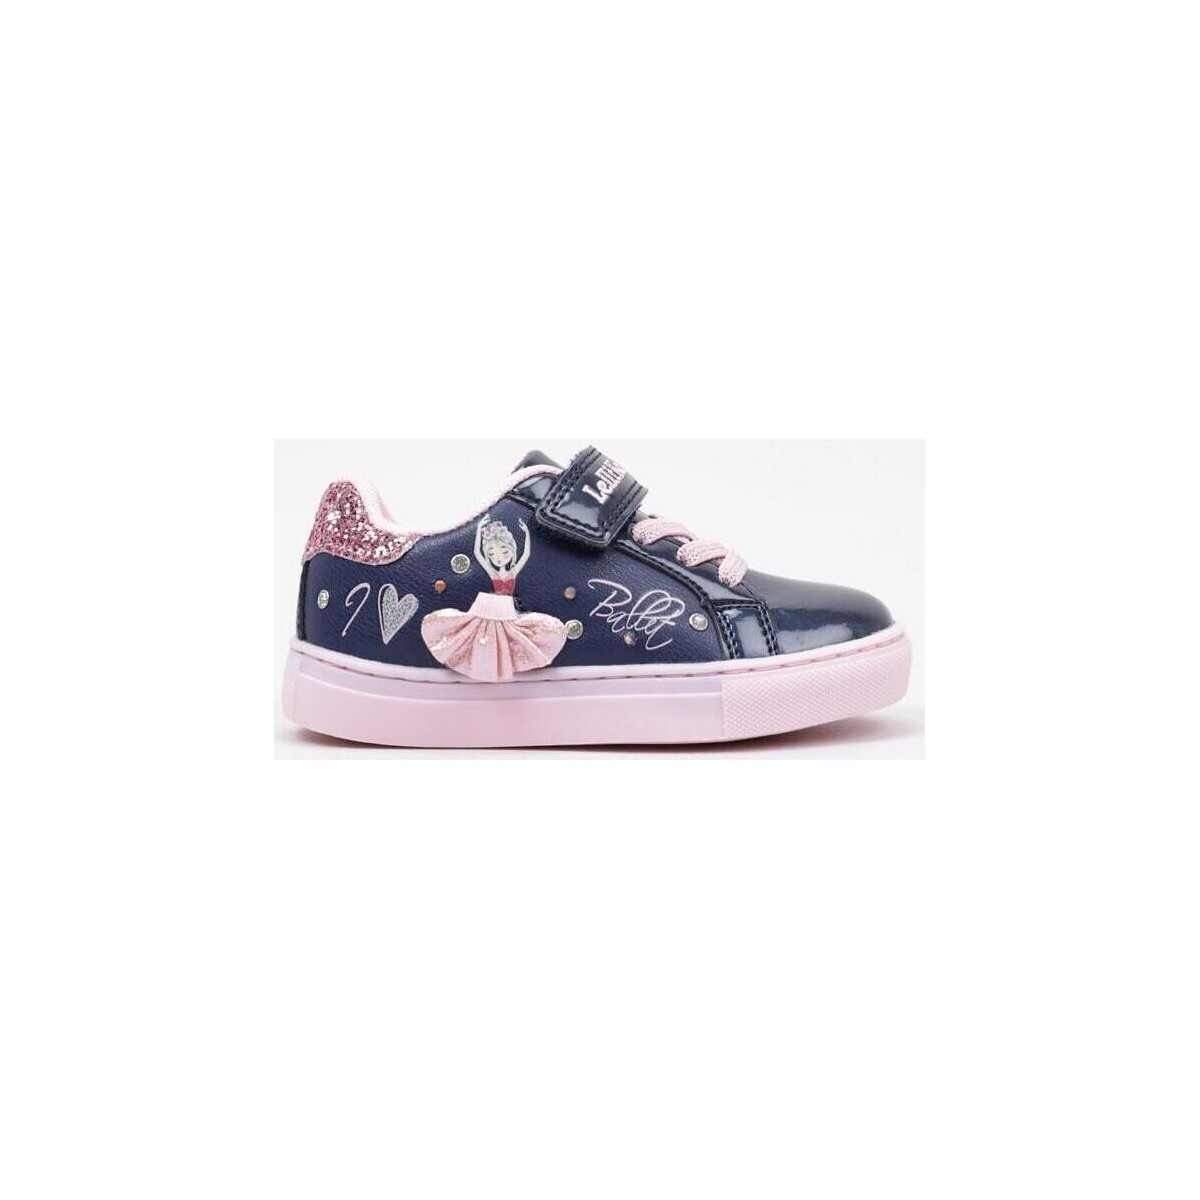 Chaussures Fille Baskets basses Lelli Kelly MILLE STELLE LUCES Marine